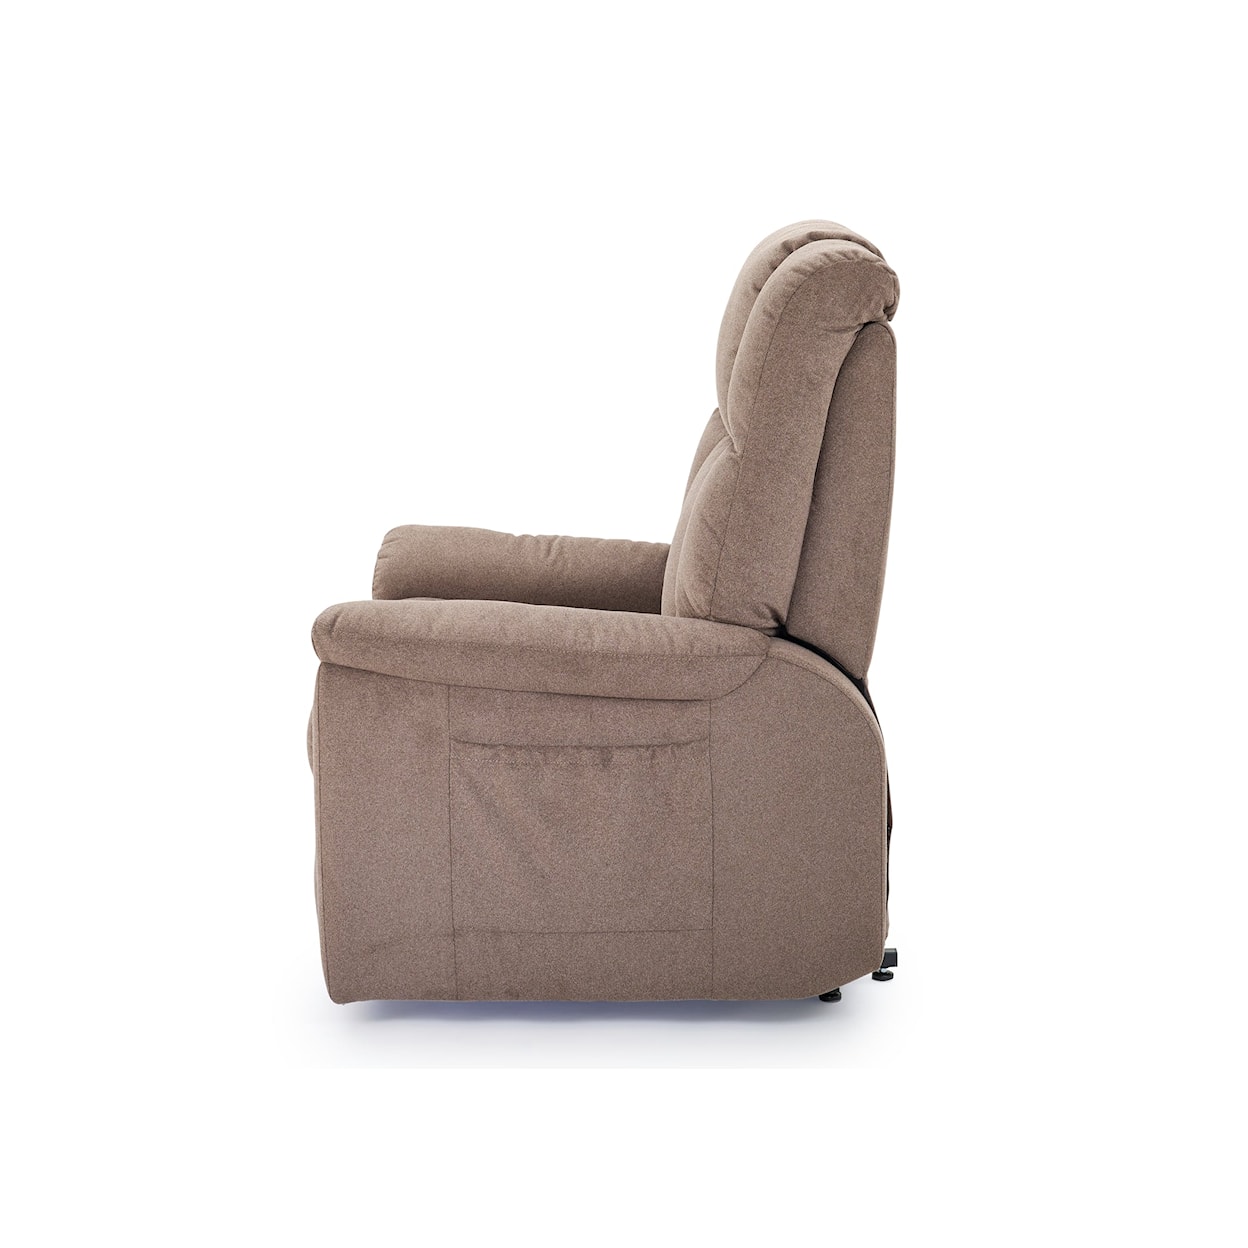 UltraComfort Living Room UC669 5-Zone Power Recliner Lift Chair